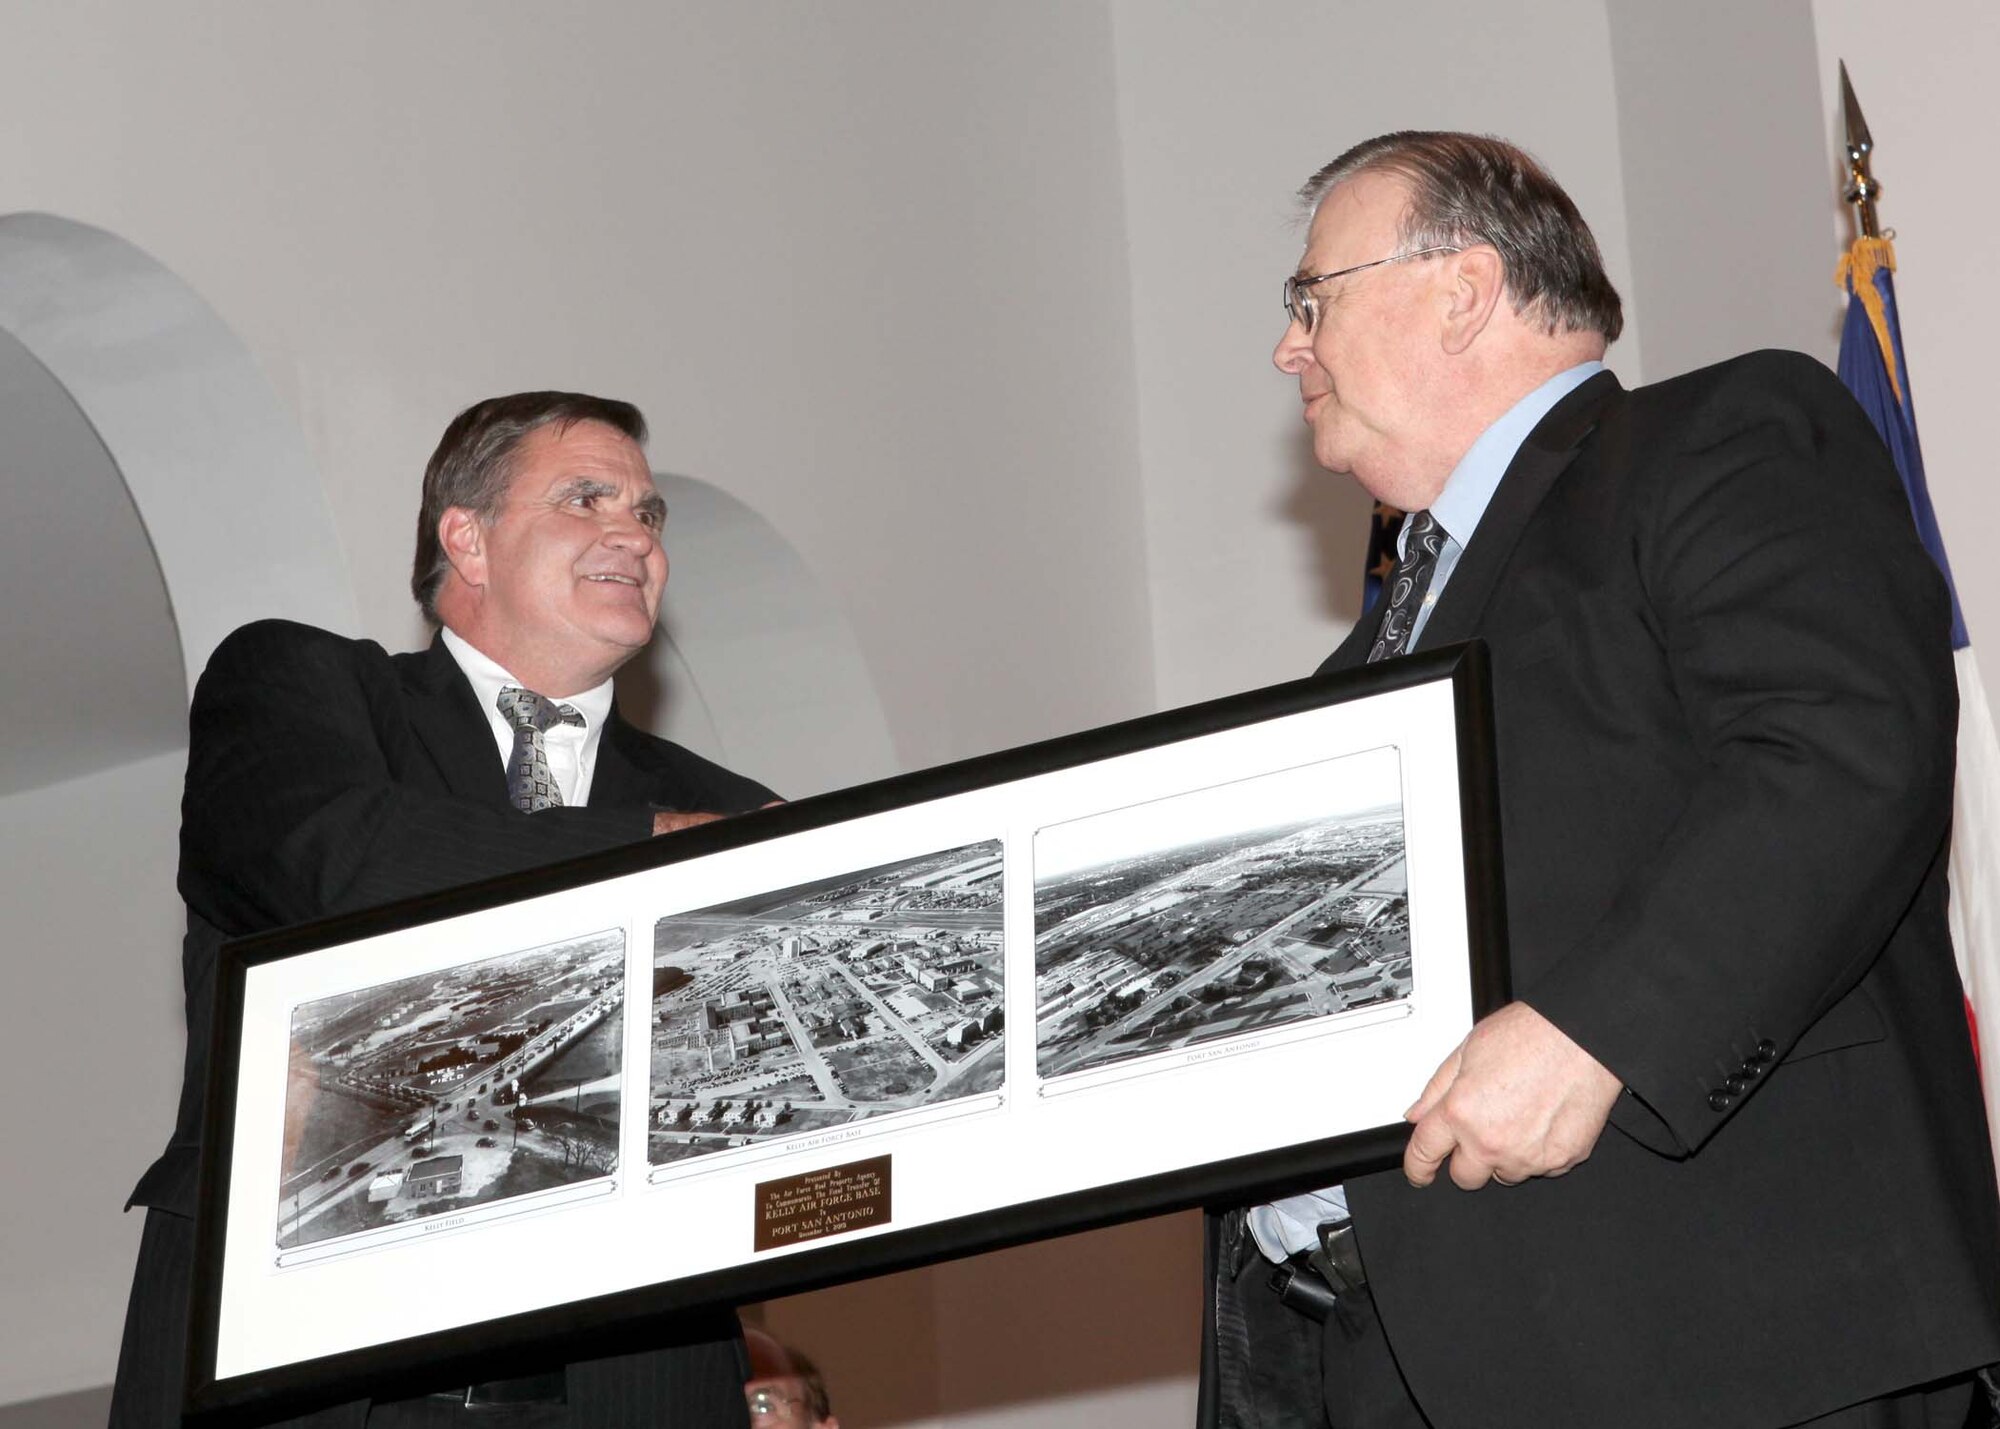 AFRPA Director Robert Moore presents Port San Antonio President & CEO Bruce Miller with historical photos of former Kelly AFB to commemorate the final property transfer.
